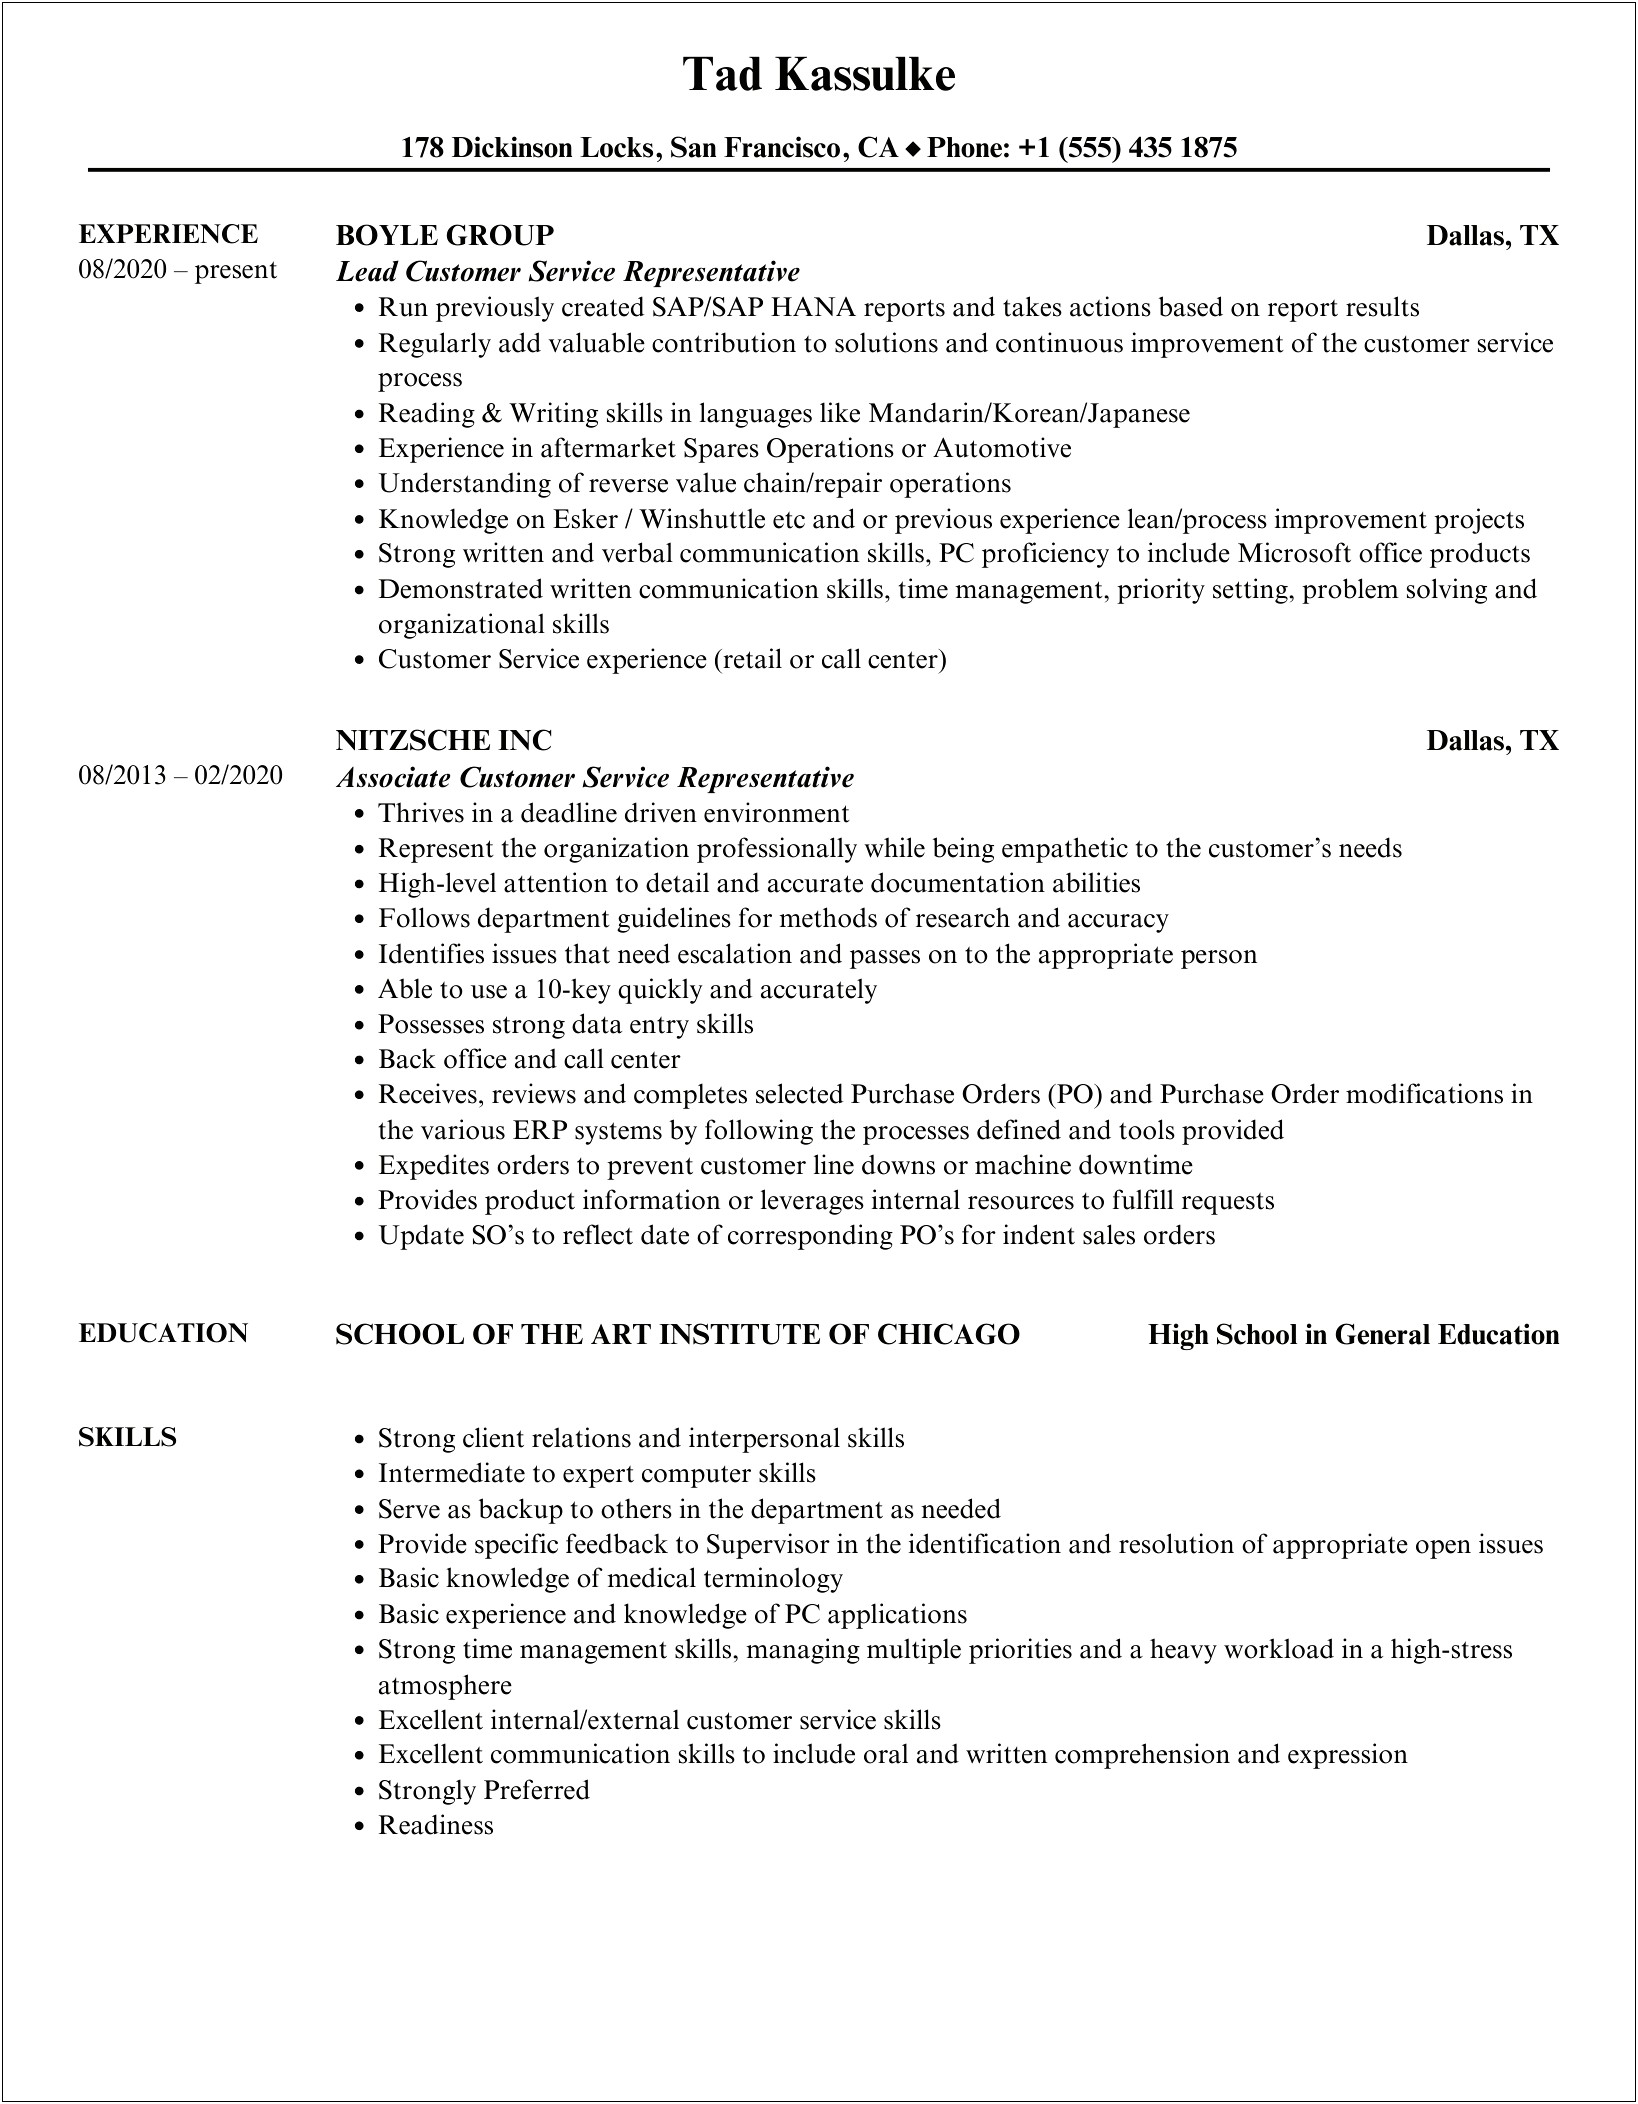 Example Profiles For A Csr Resume